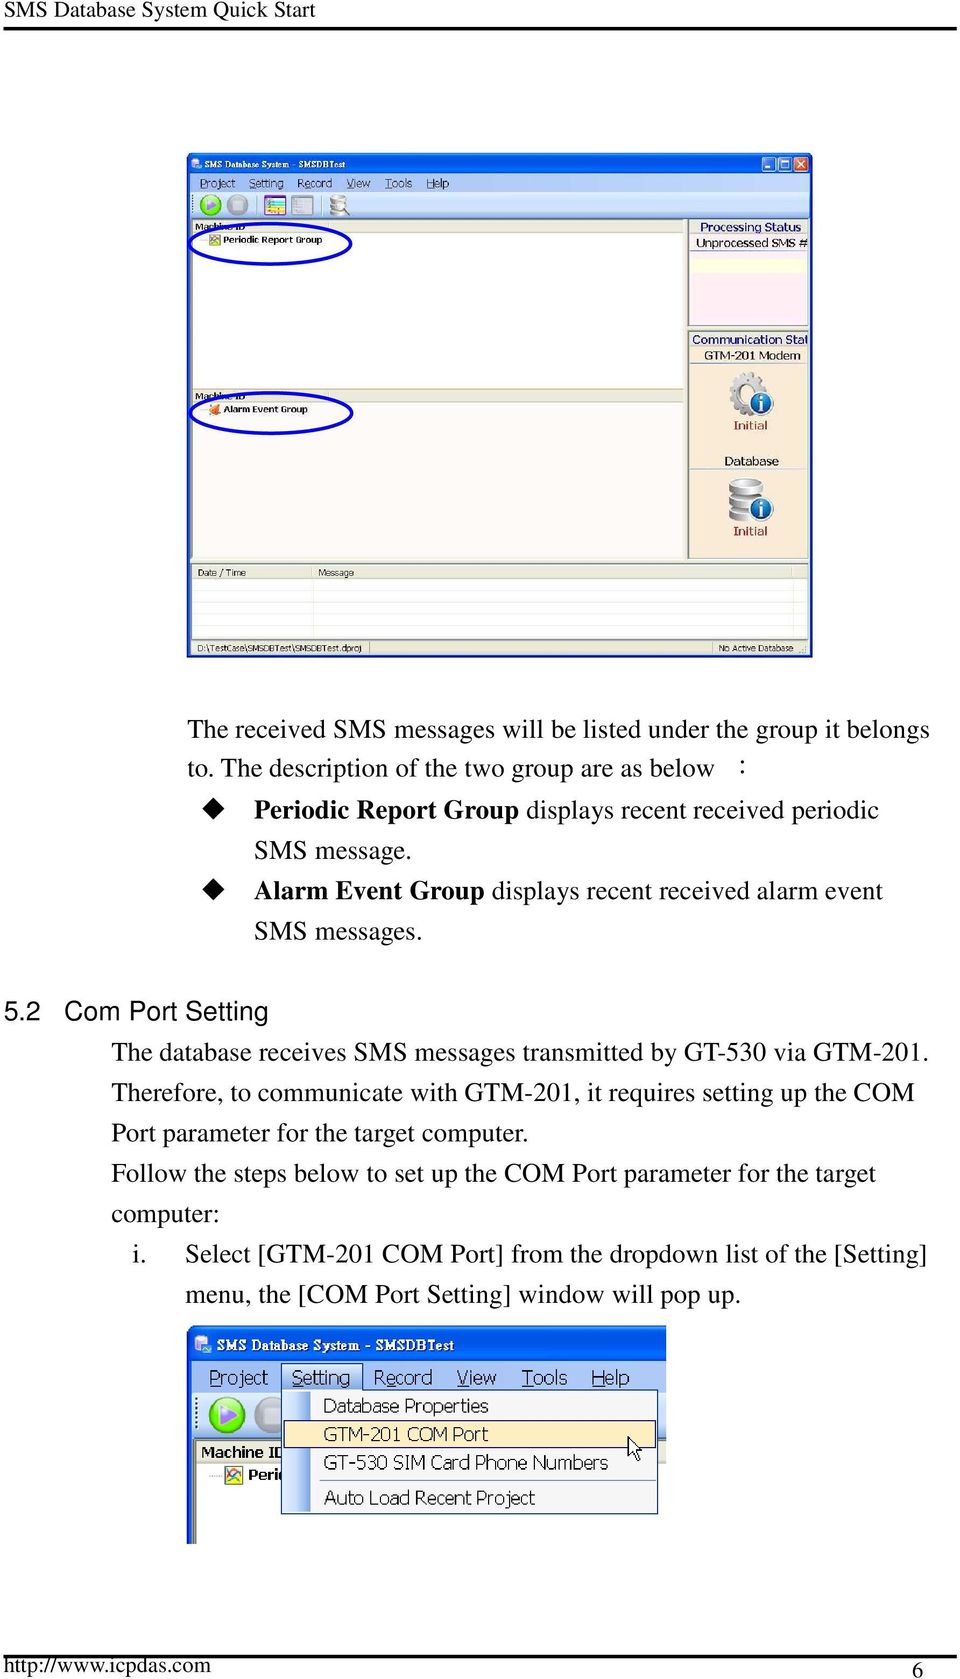 Alarm Event Group displays recent received alarm event SMS messages. 5.2 Com Port Setting The database receives SMS messages transmitted by GT-530 via GTM-201.